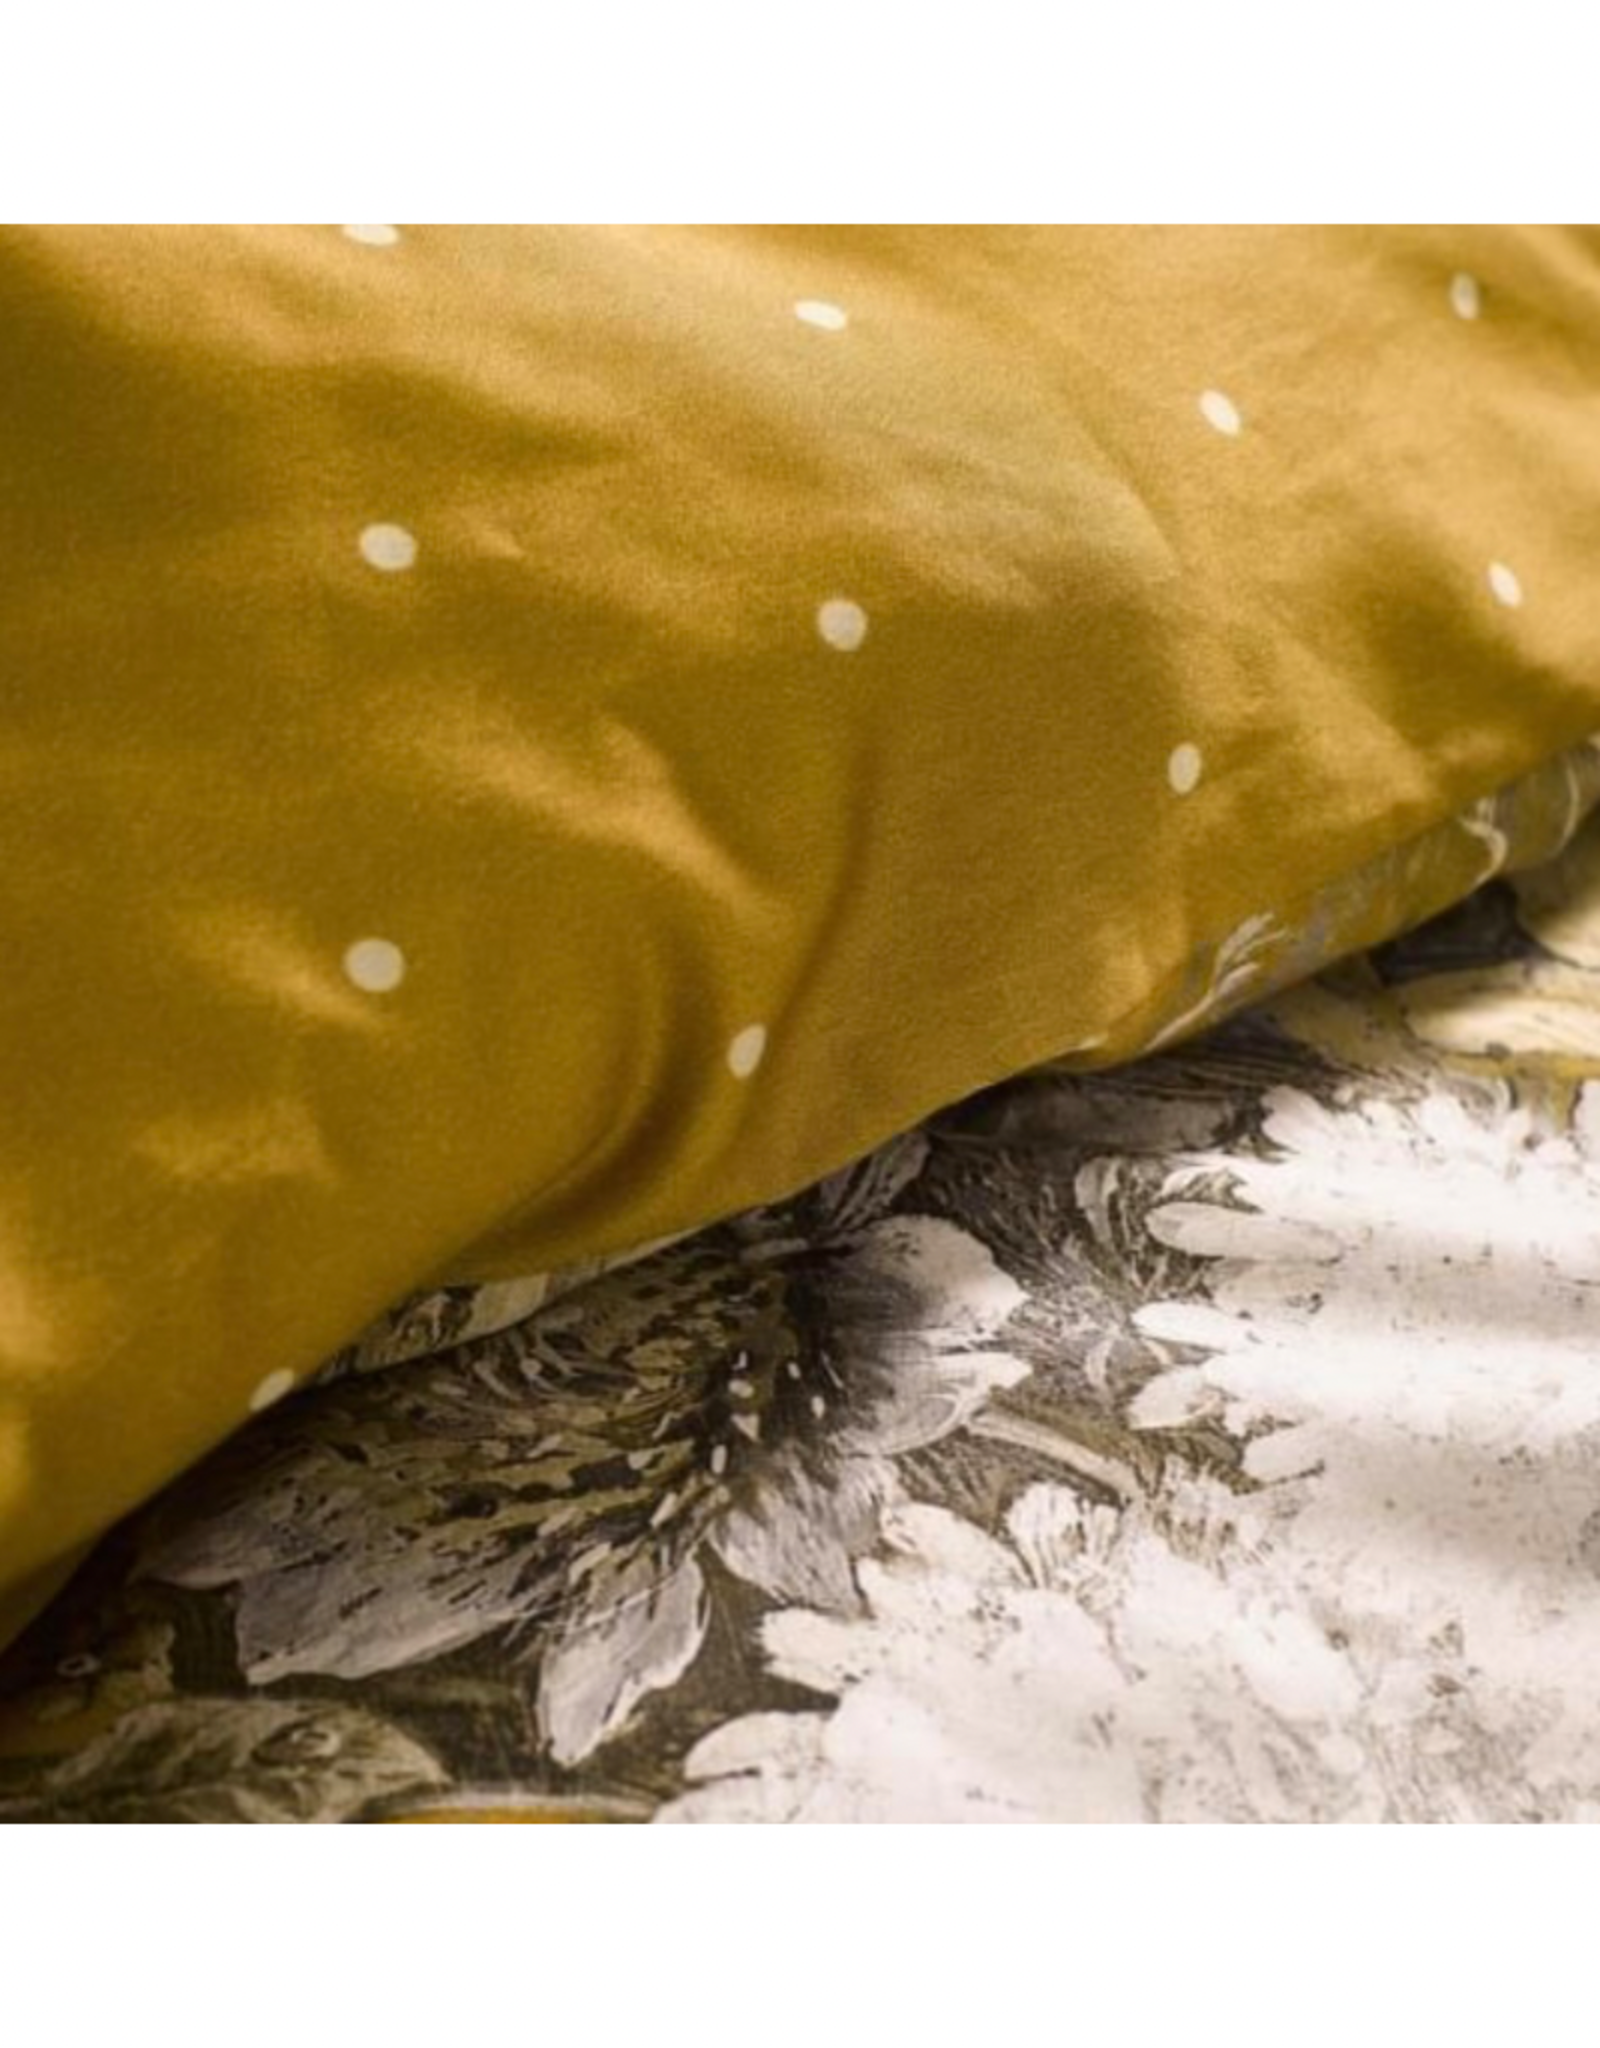 Duvet Cover Intermark Maily Gold Queen  w / shams